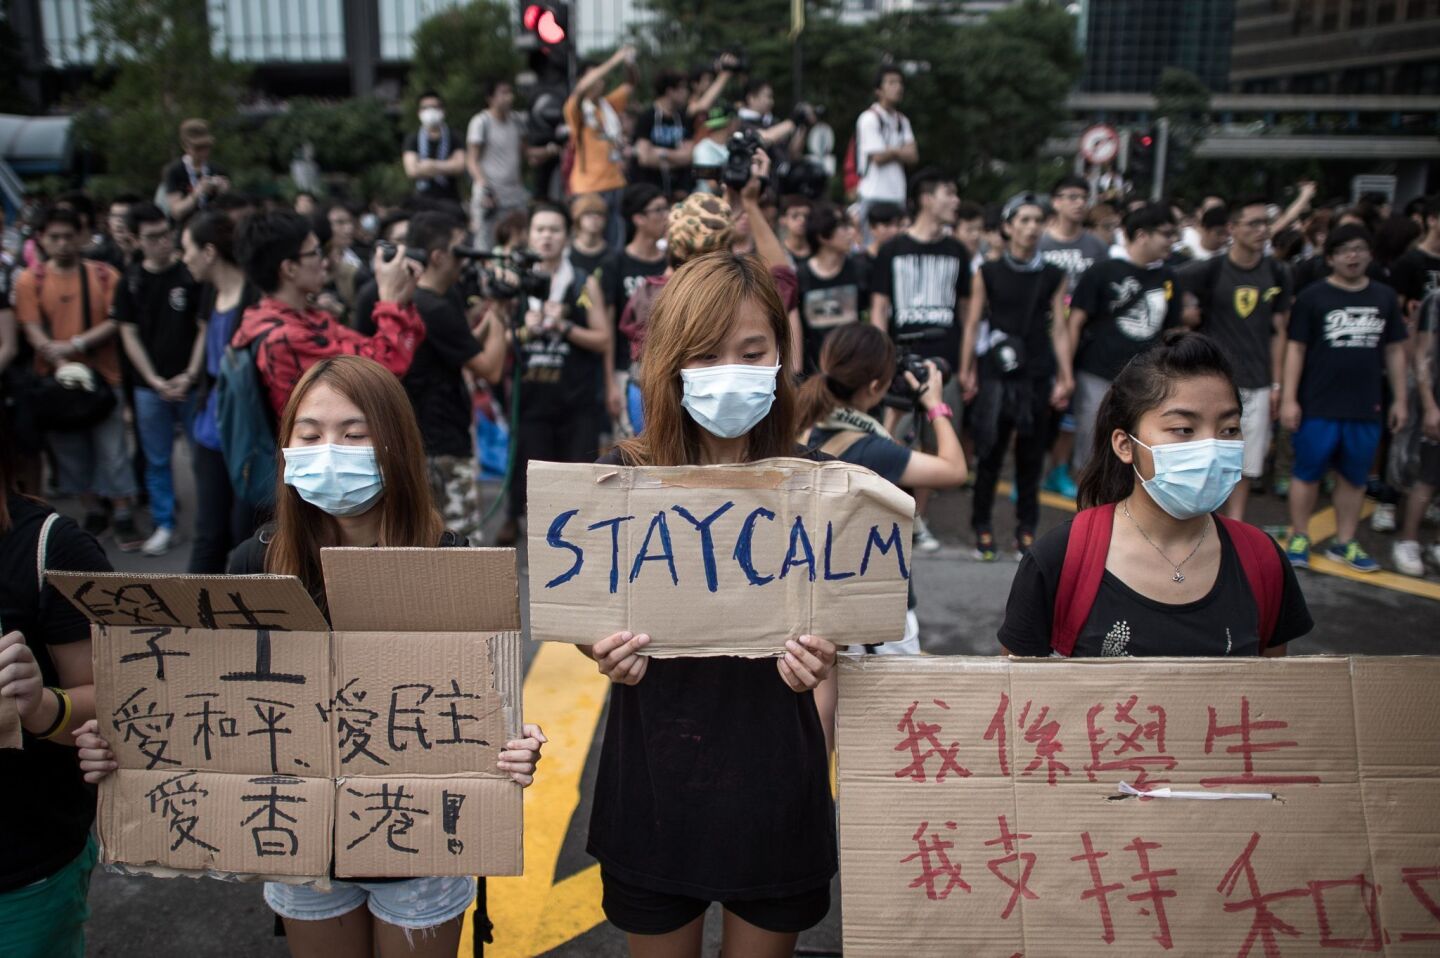 Pro-democracy demonstrators display placards as they gather near a ceremony marking China's 65th National Day in Hong Kong on Wednesday.